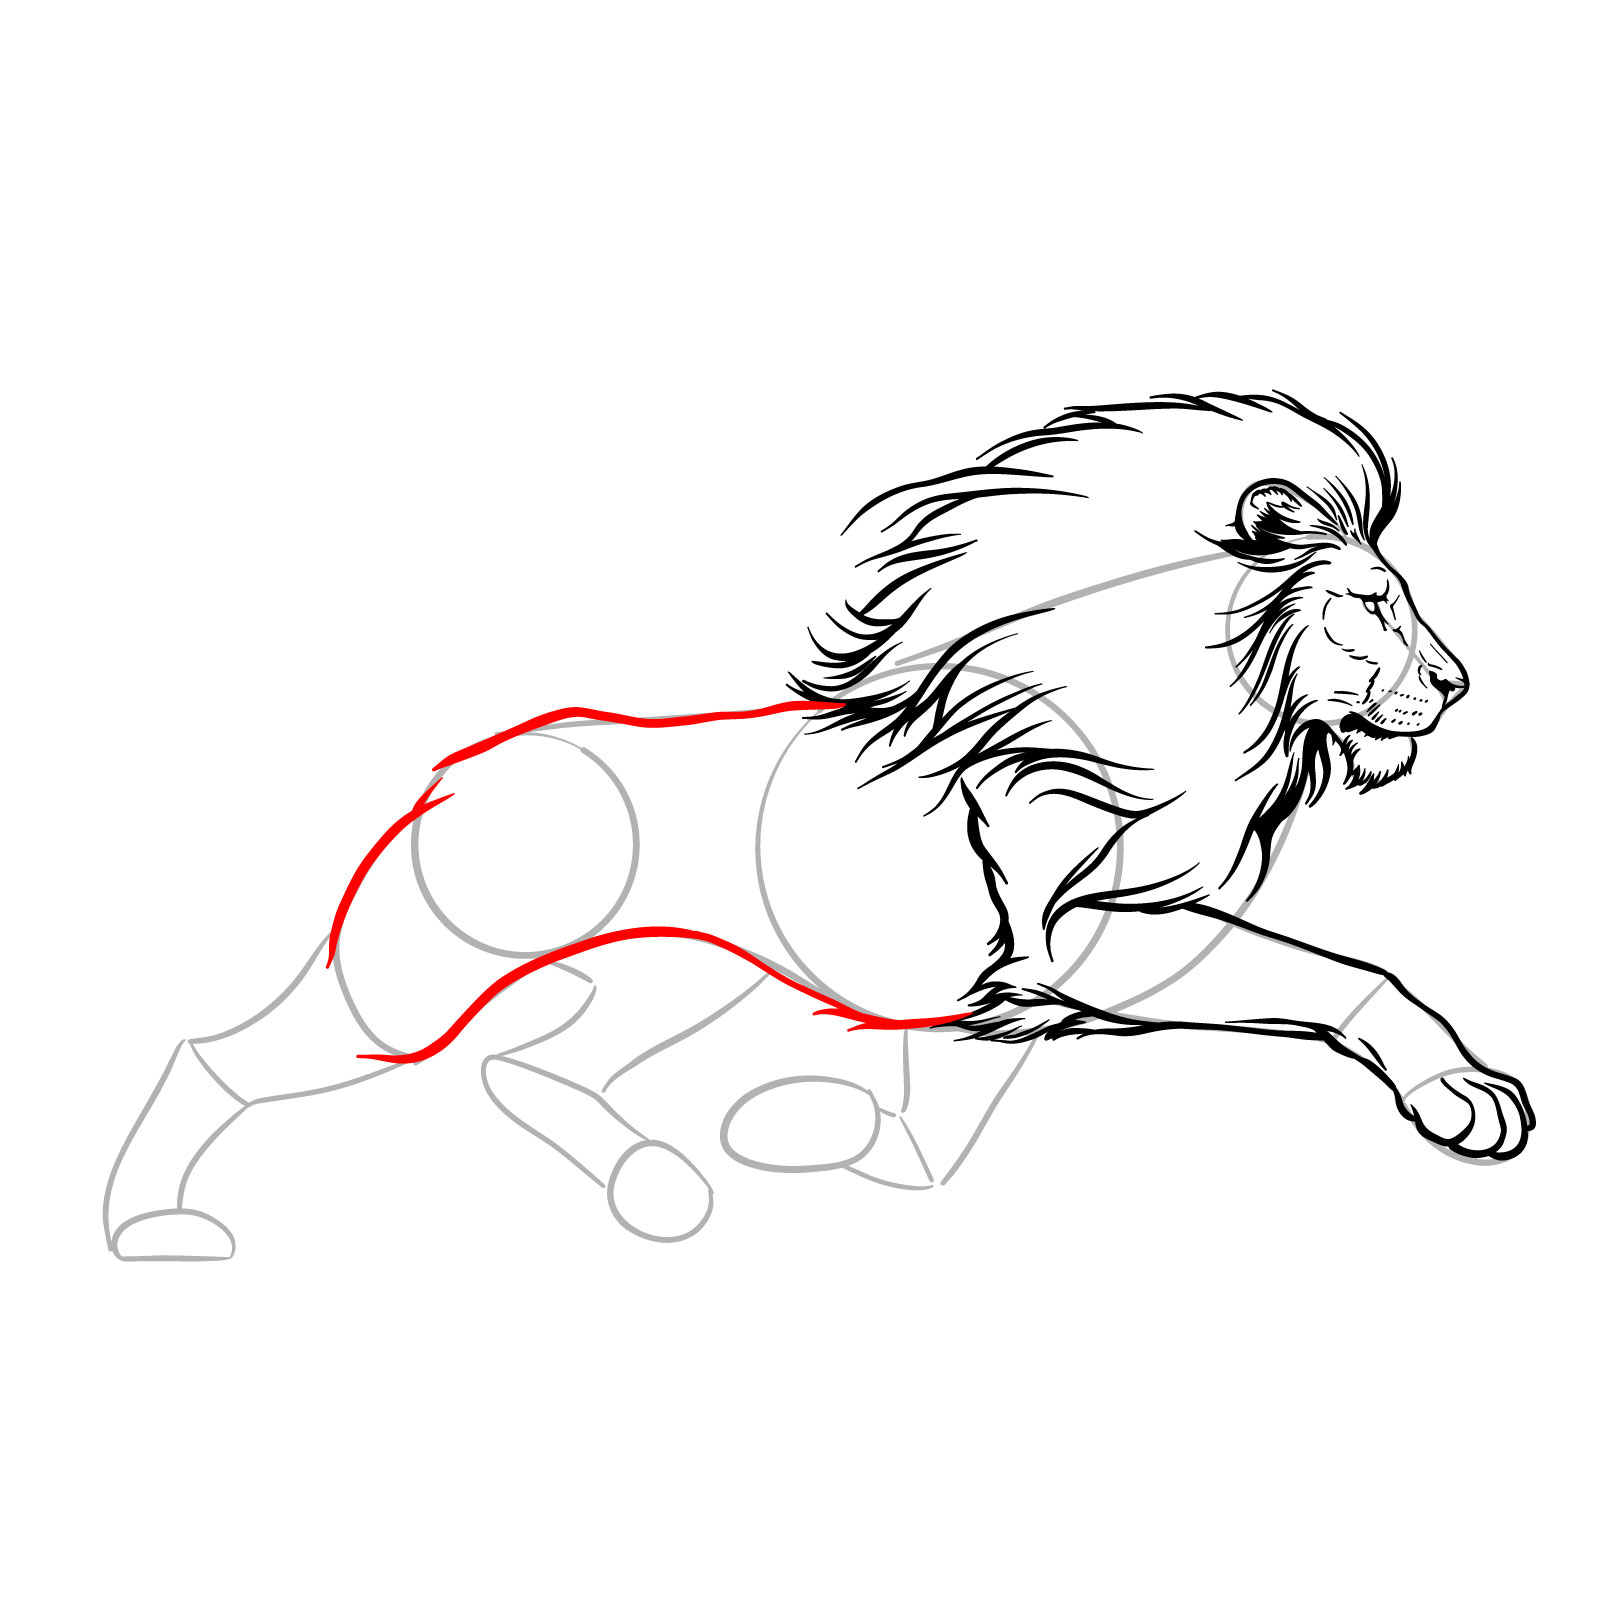 Outlining the body and upper hind leg of a running lion - step 11